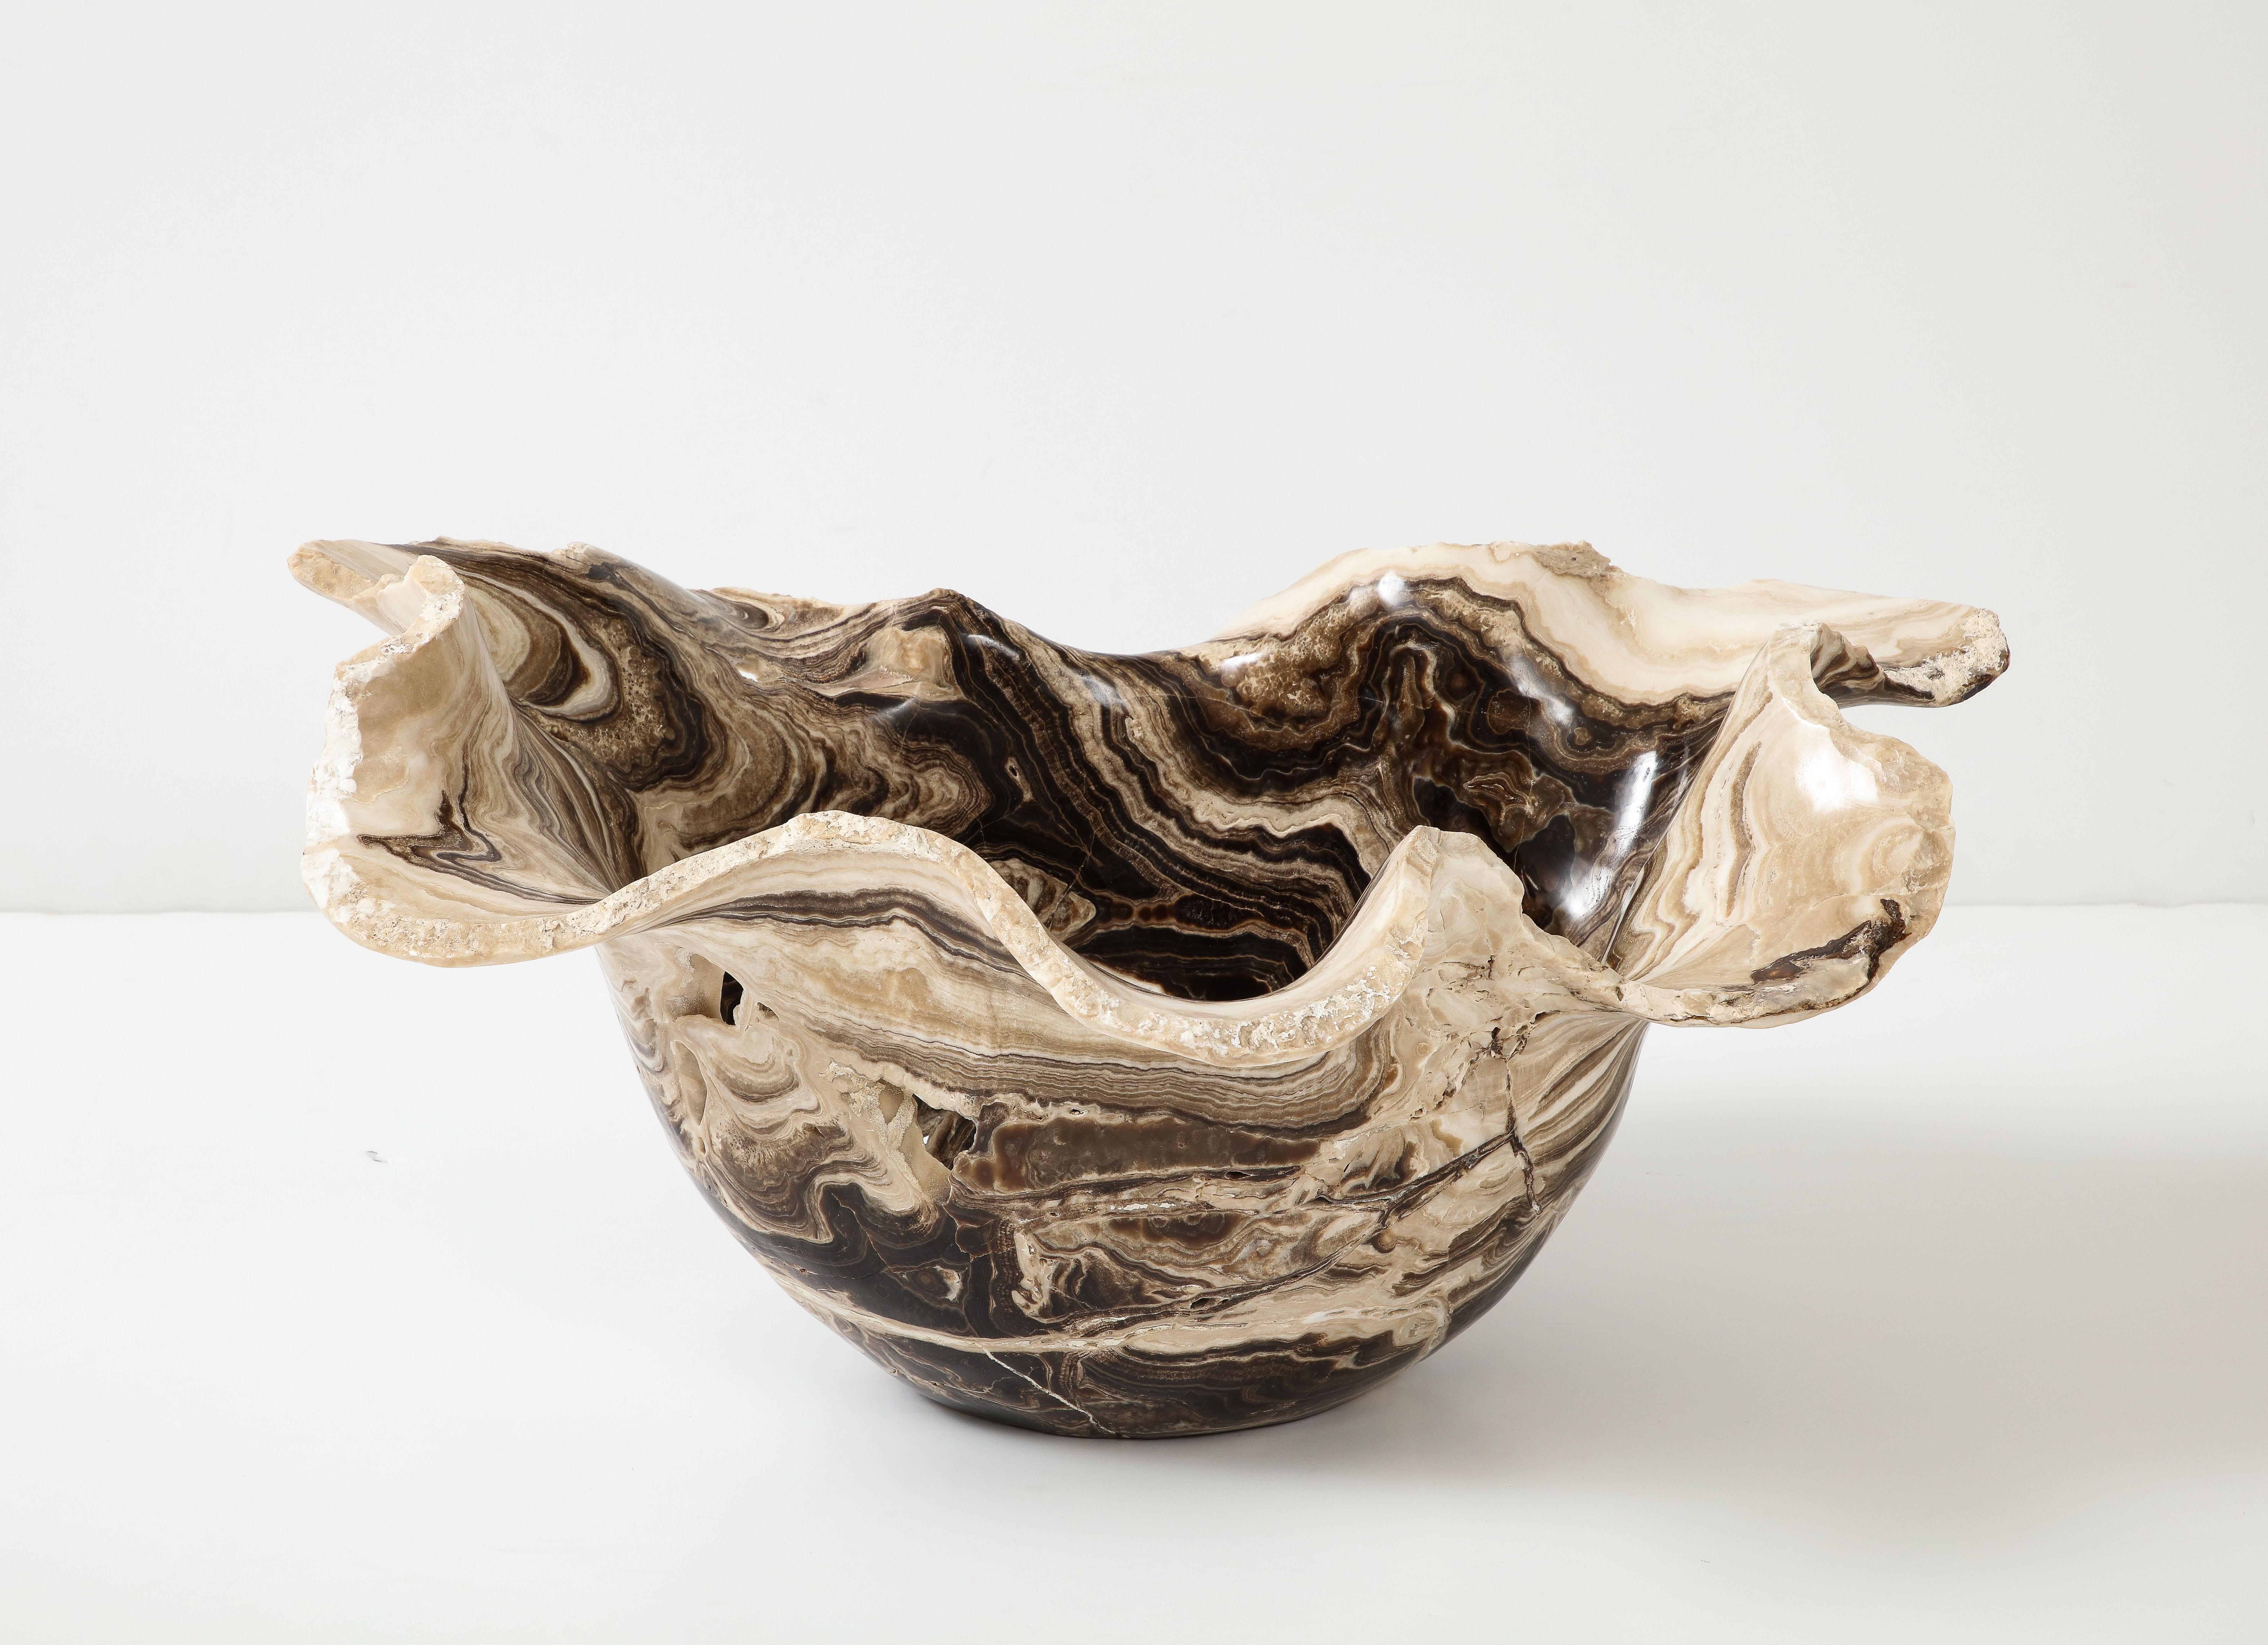 A monumental sculptural hand-carved onyx bowl with an undulating scalloped live edge in shades of deep chocolate brown, cream, white and beige. The coloration and proportion of this bowl are rare and striking and the swirls of color punctuated with